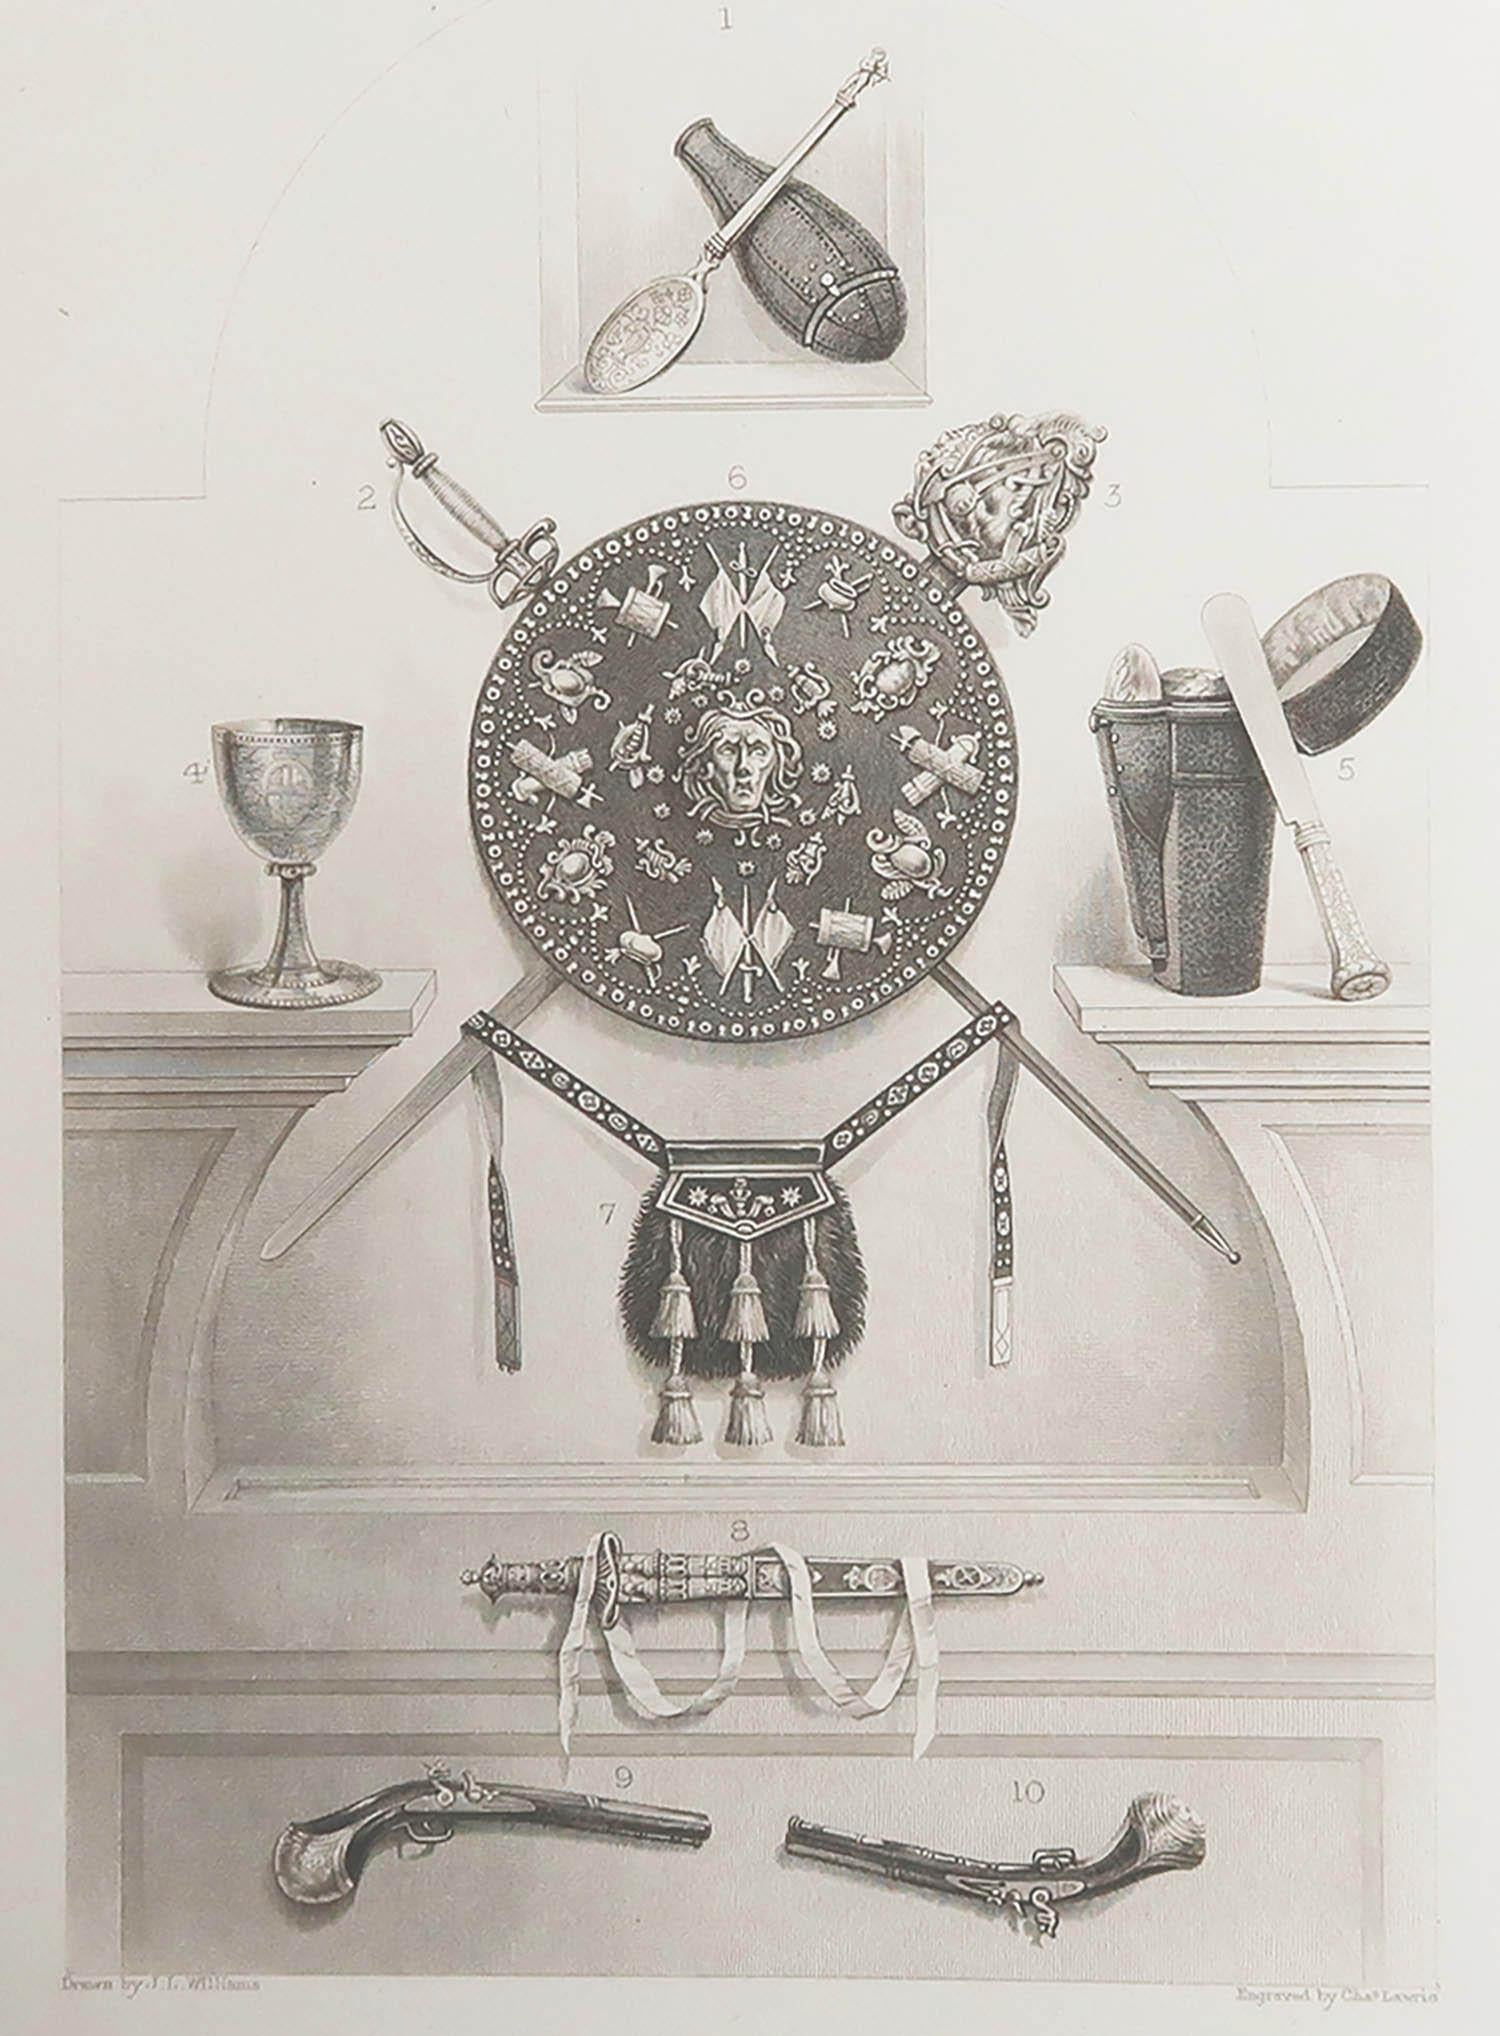 Great image of relics belonging to Charles Edward Stuart, Bonnie Prince Charlie

Fine steel engraving by Charles Lawrie

Published by Blackie, Edinburgh,Circa 1880

Unframed.